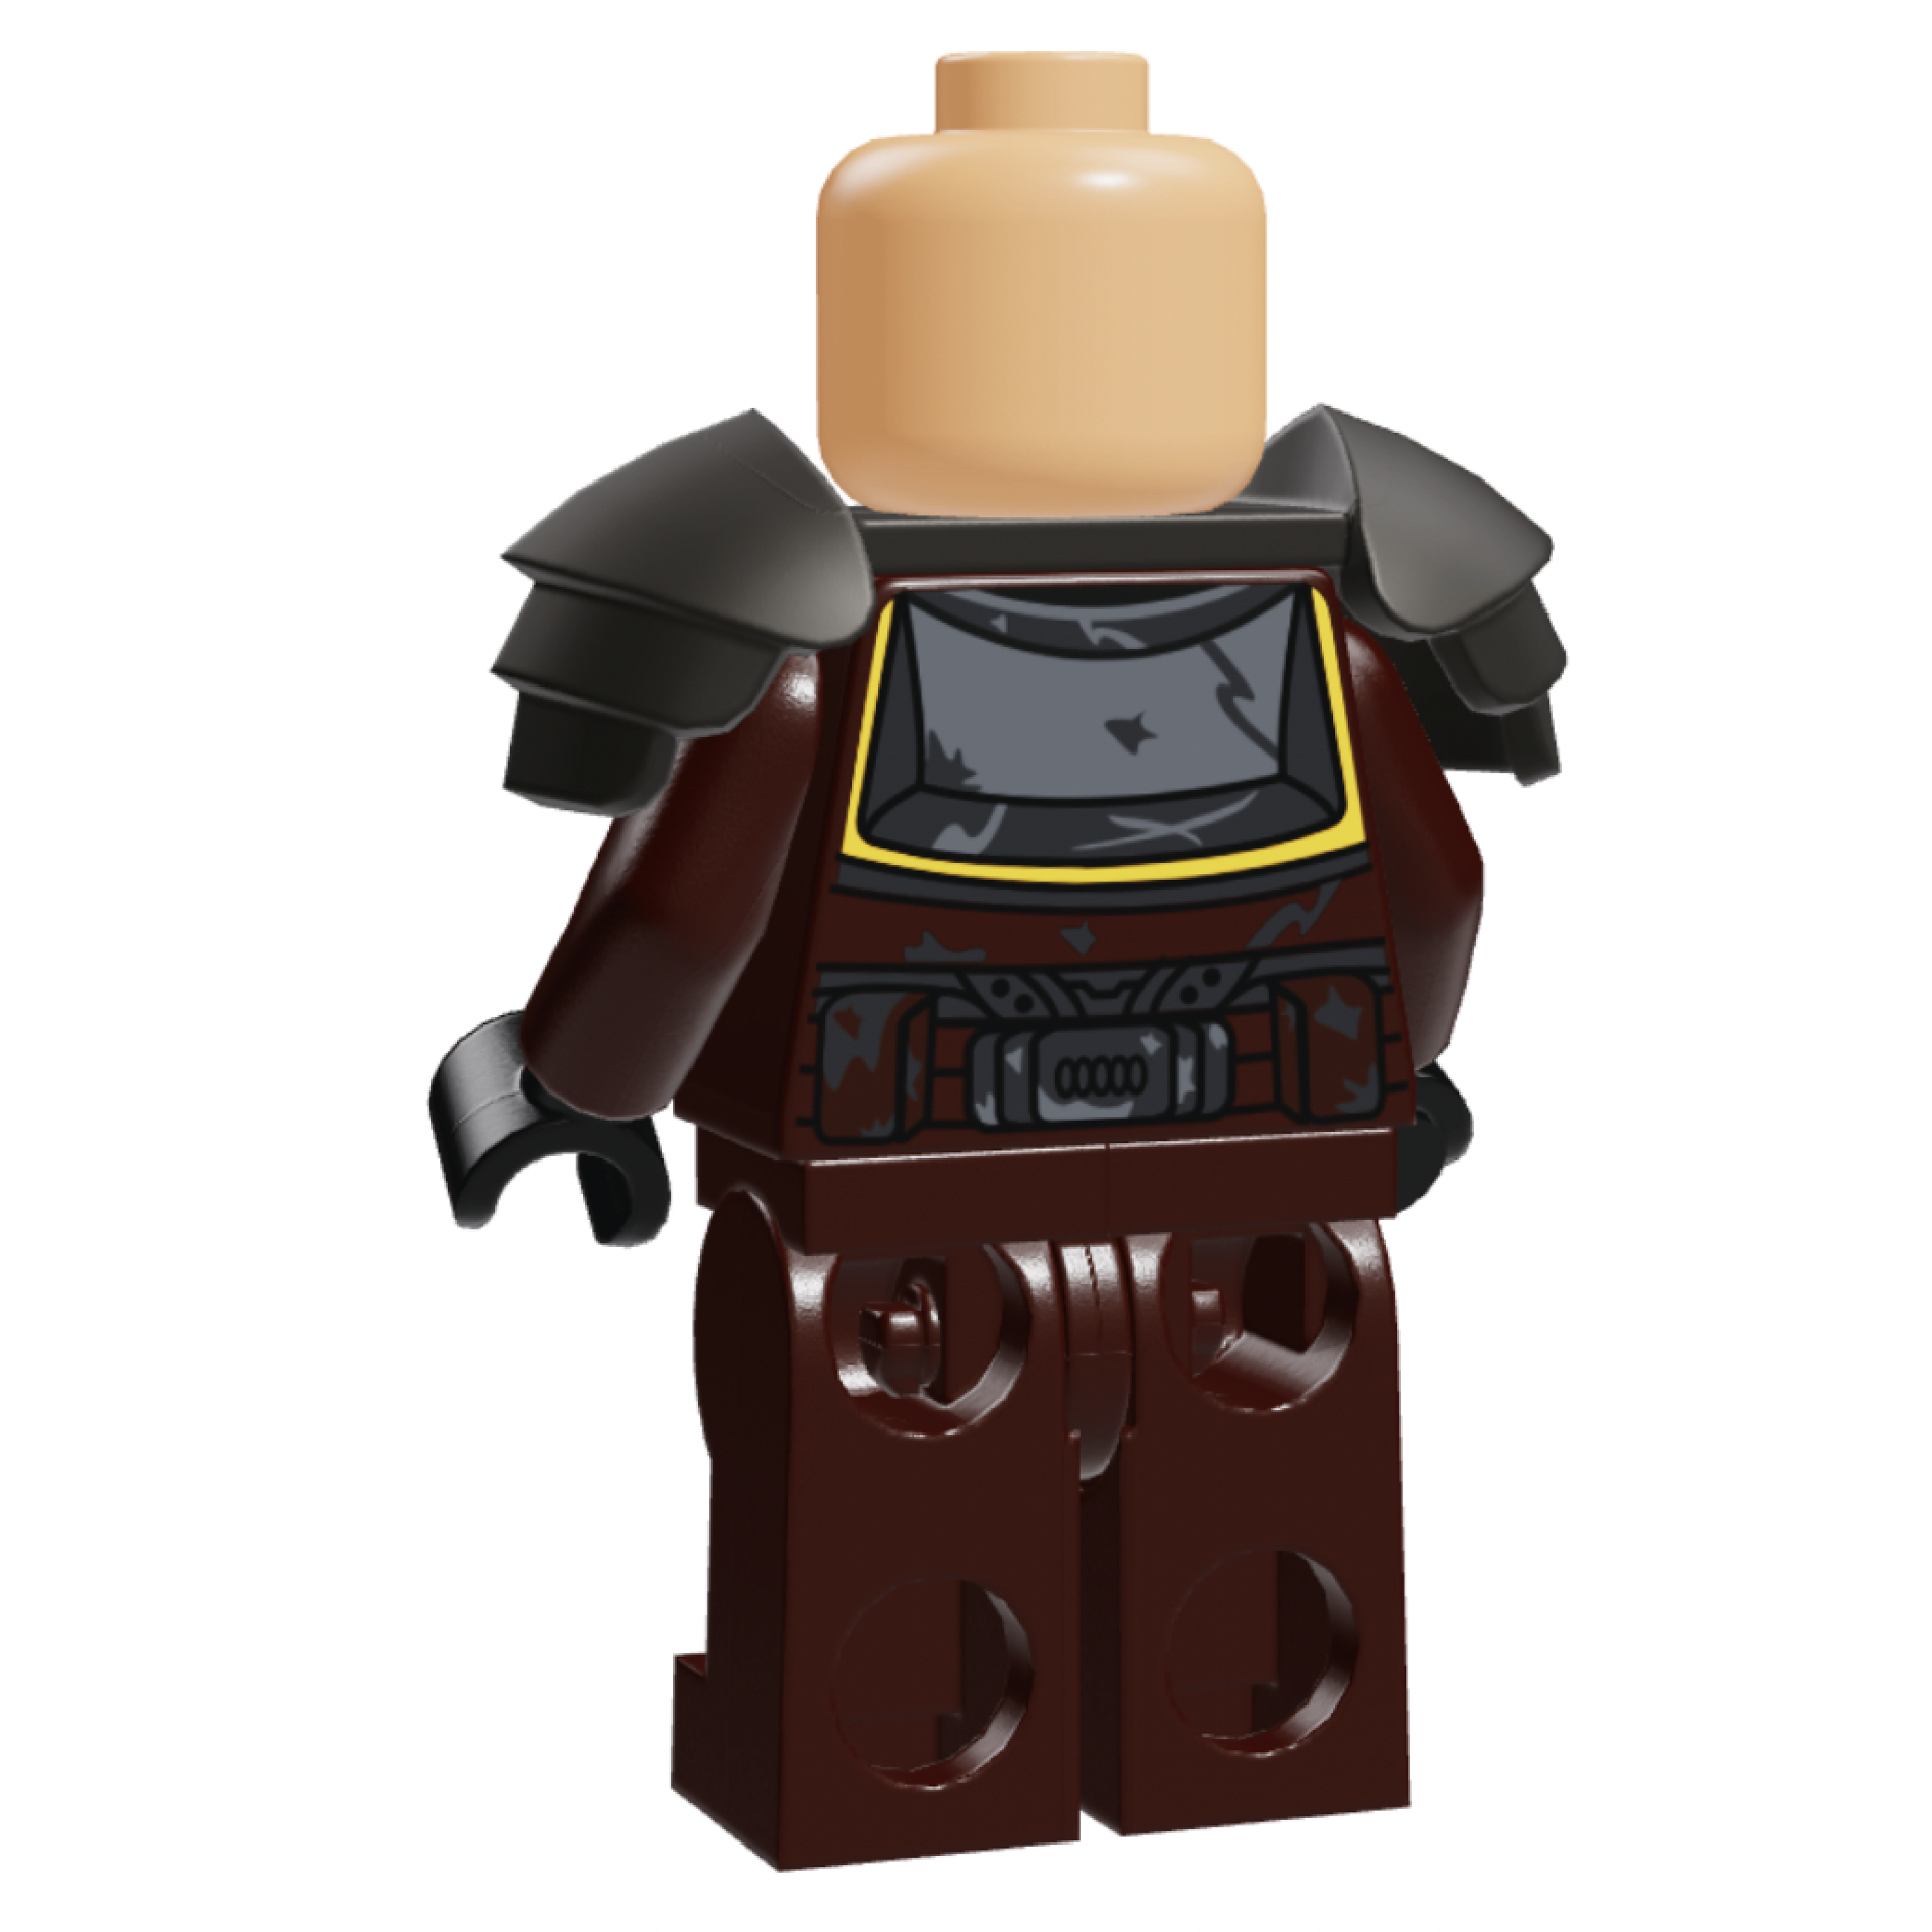 SW Customs Wrecker Minifigure by High Ground Figs